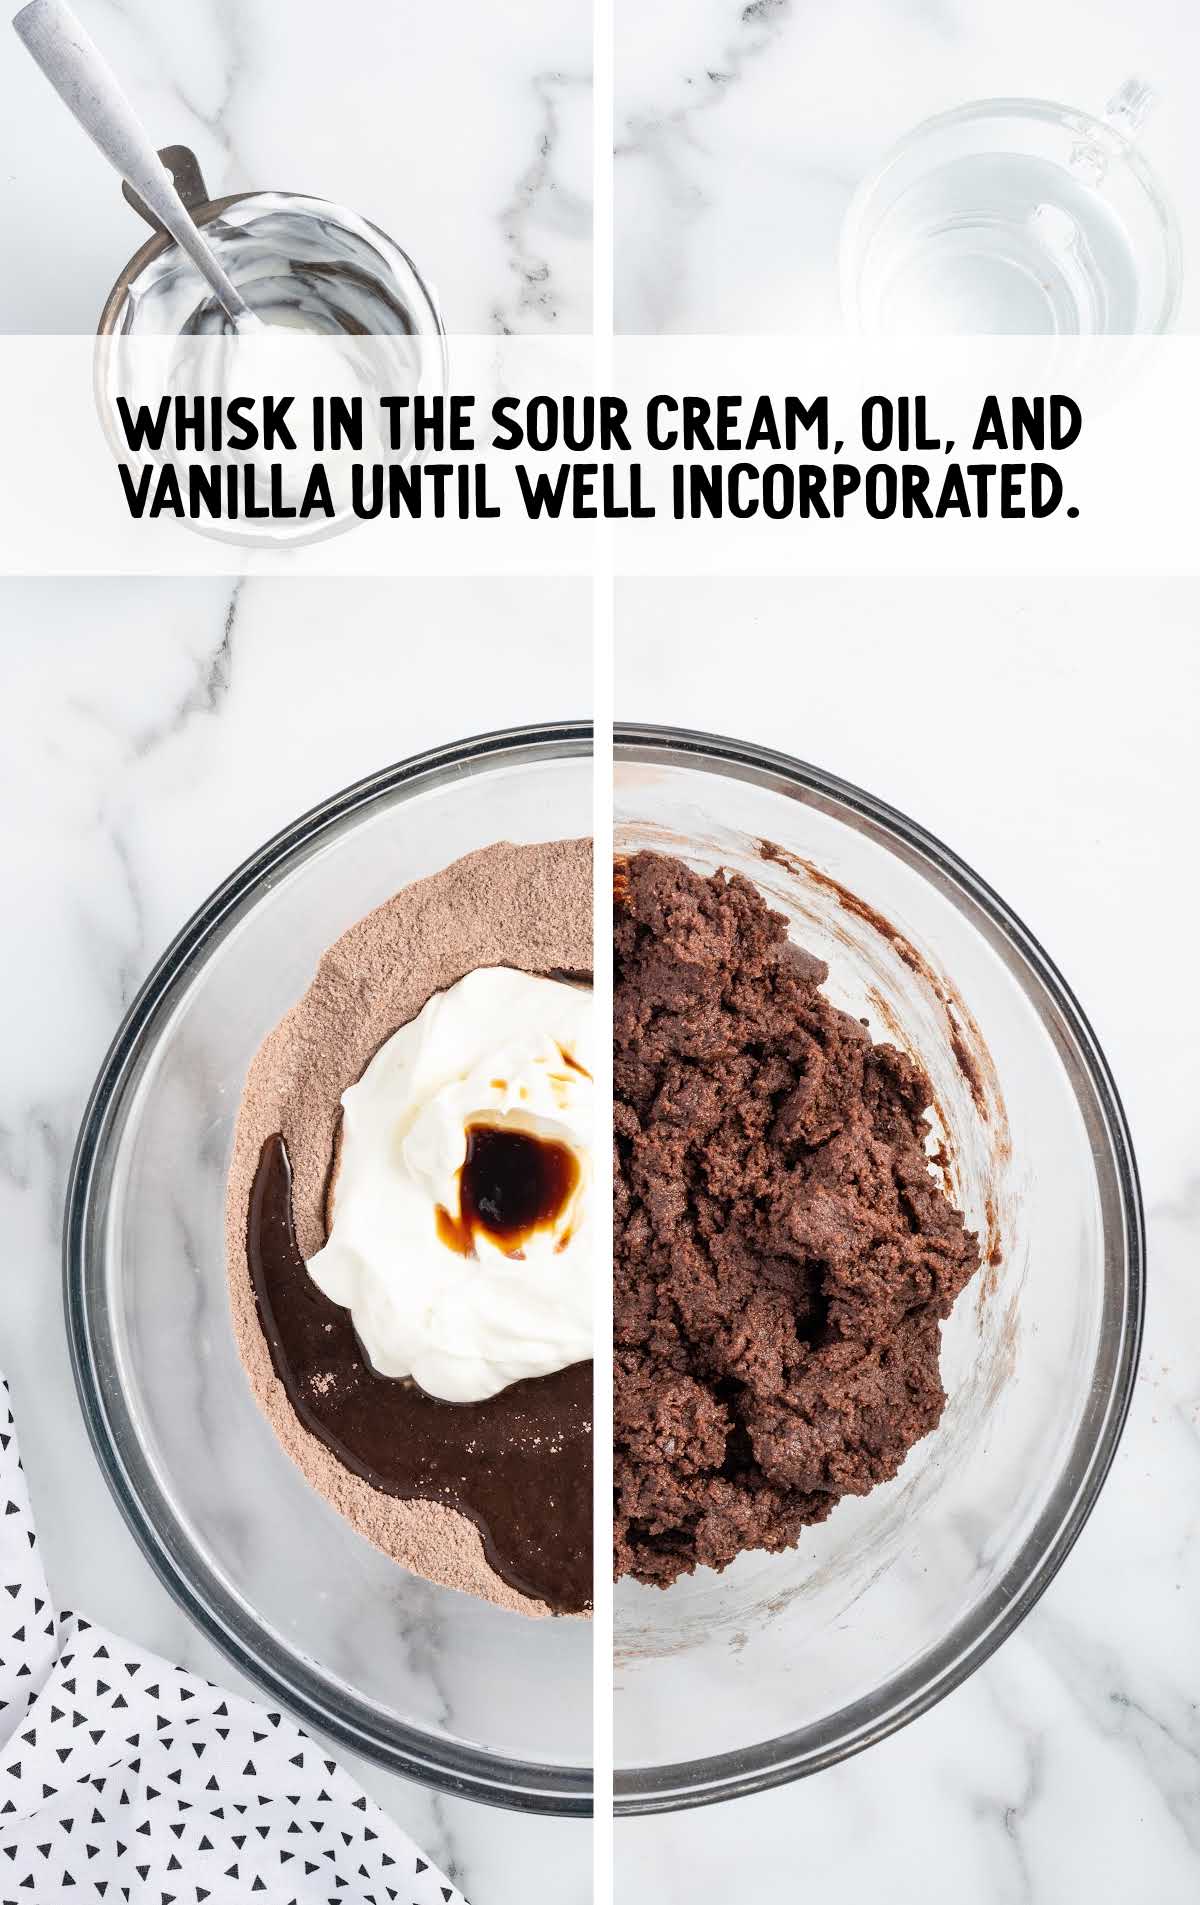 sour cream, oil, and vanilla combined in a bowl